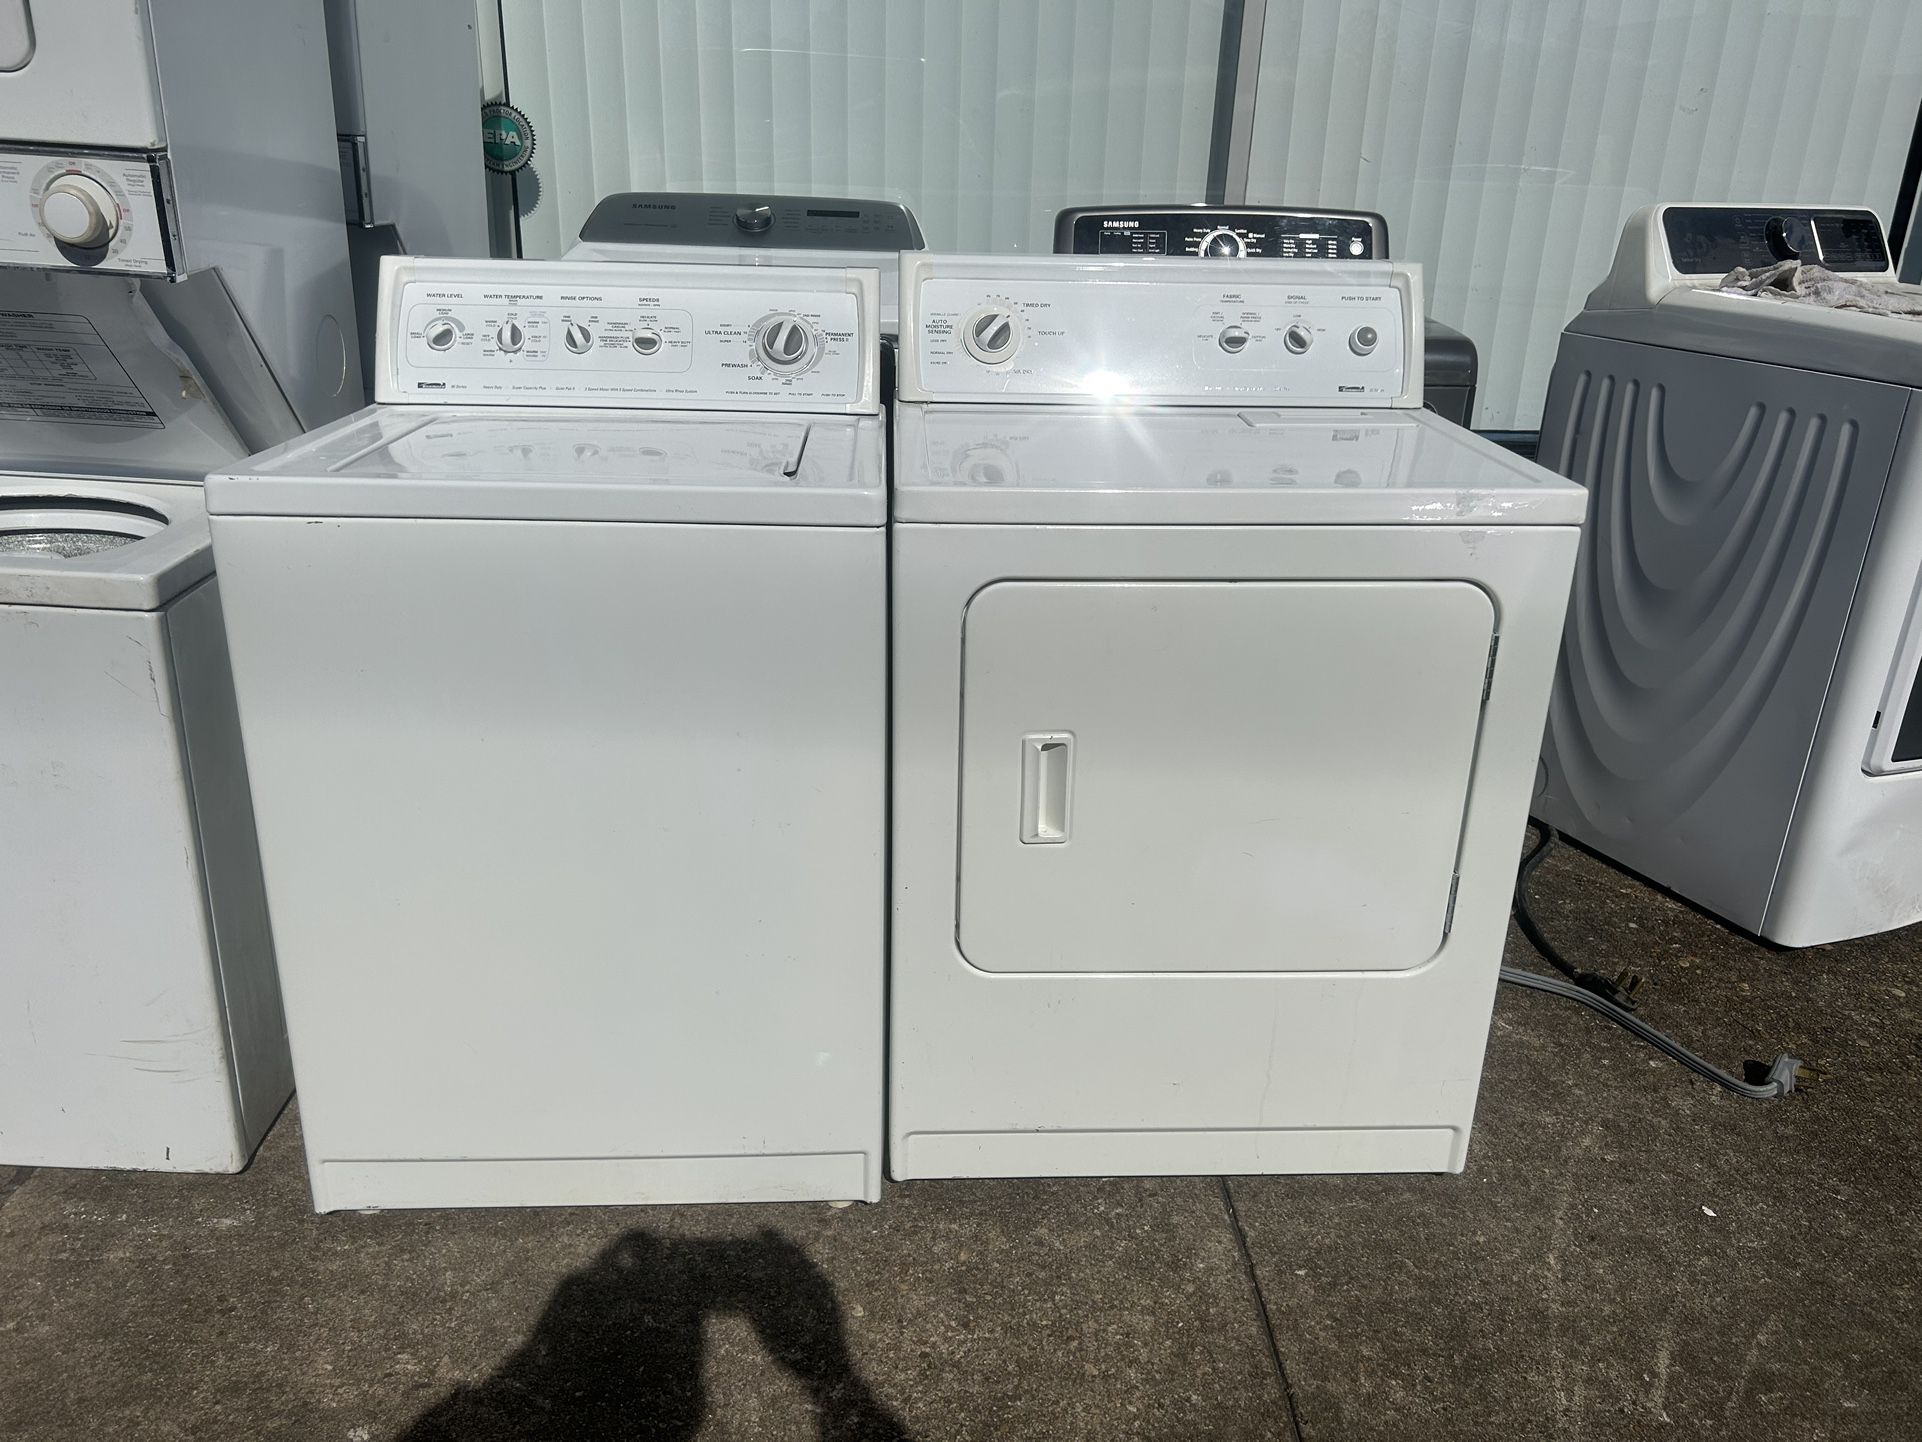 2 matching KENMORE Washer dryer sets.$350 each set delivered installed.$300 picked up.4 Month warranty